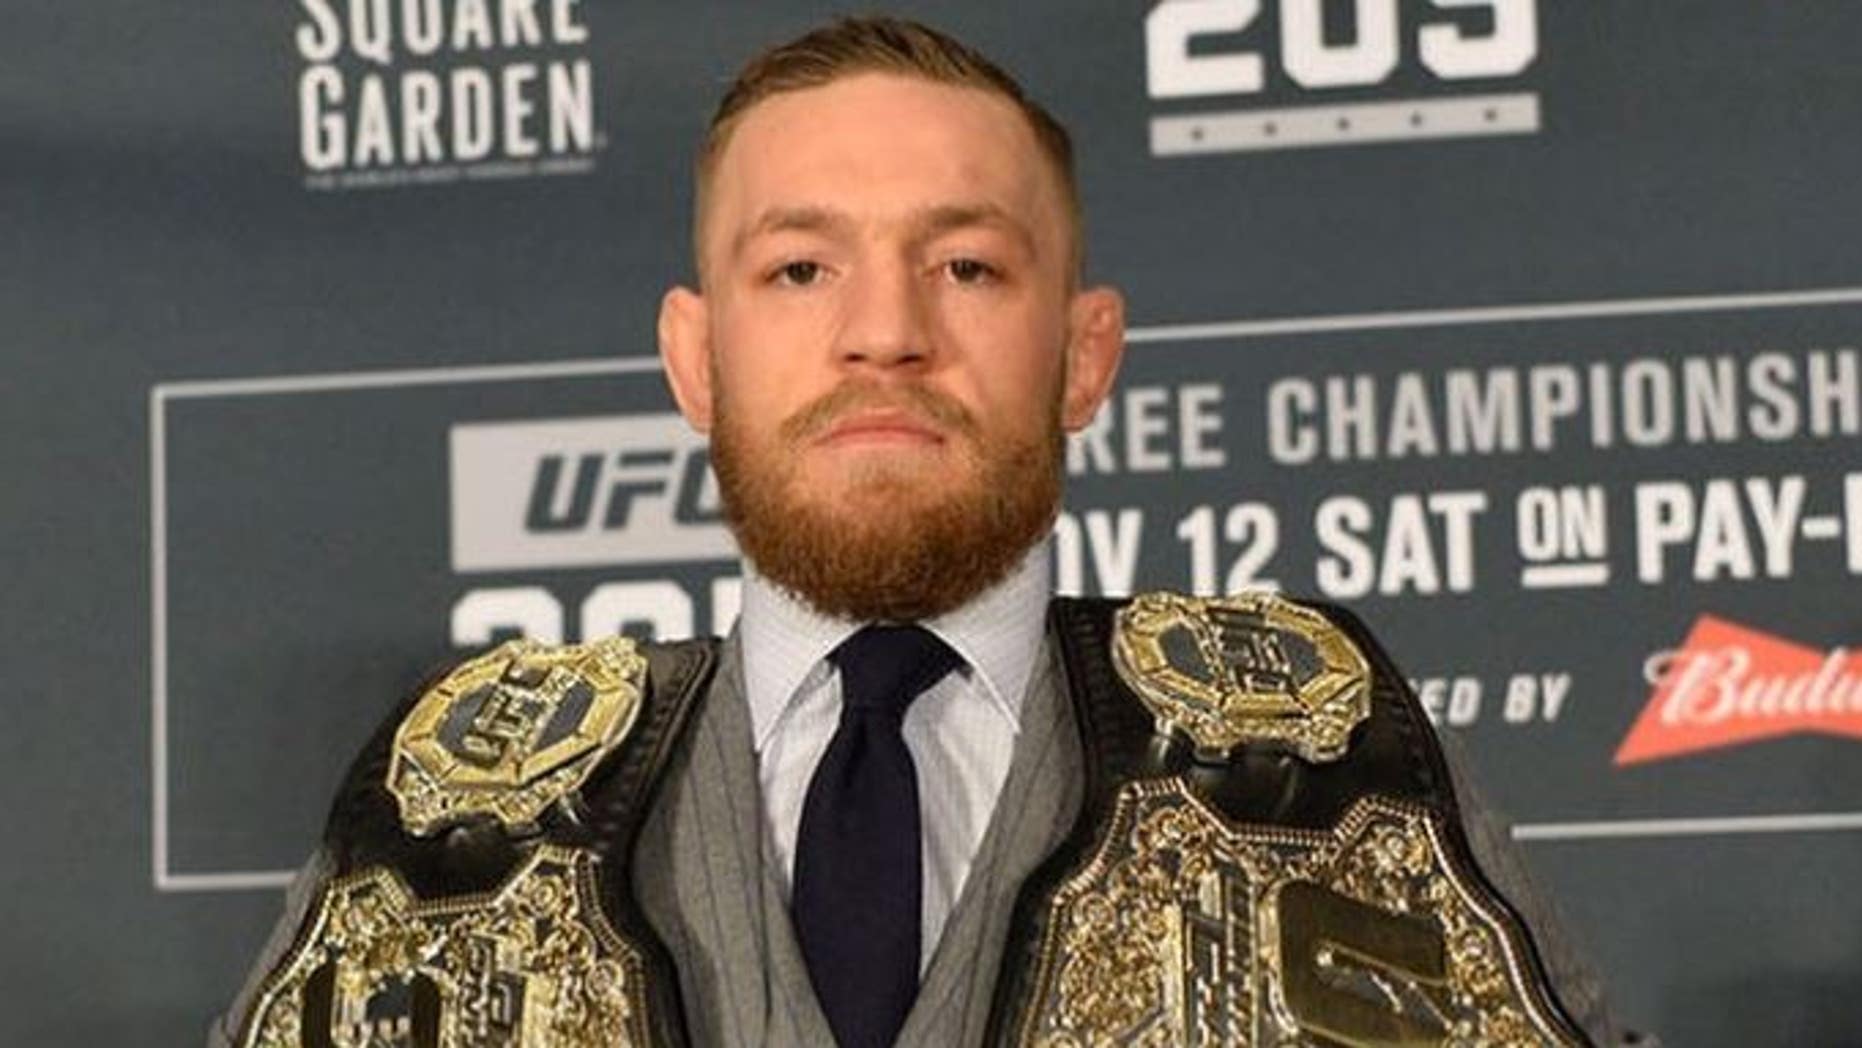 Conor McGregor said early Tuesday morning that he was retiring from MMA.